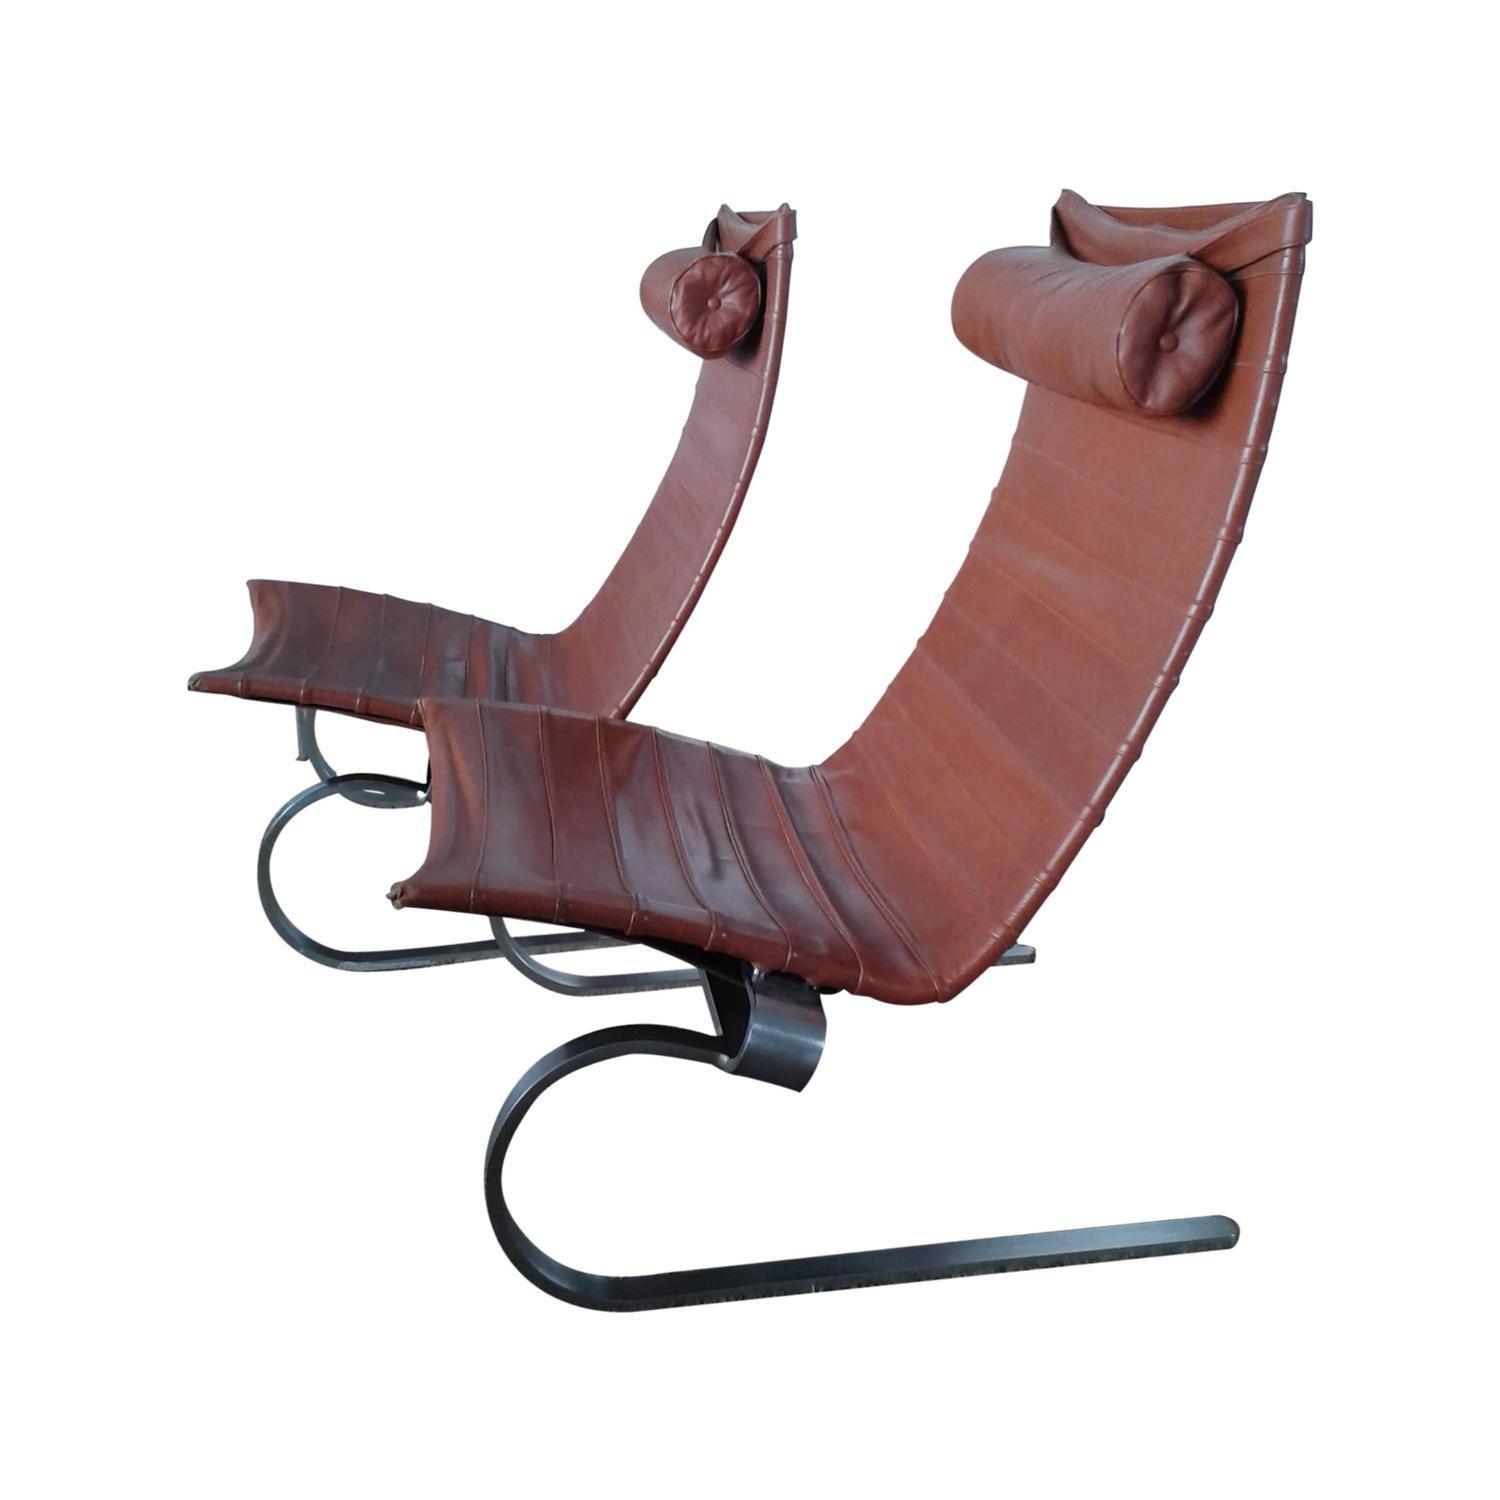 PK 20 is a laidback and elegant lounge chair in original leather, built upon a flexible matt chromed spring steel frame. The beautiful curve of the legs and the floating frame distinquish this chair. Signed with impressed manufacturer’s mark on each